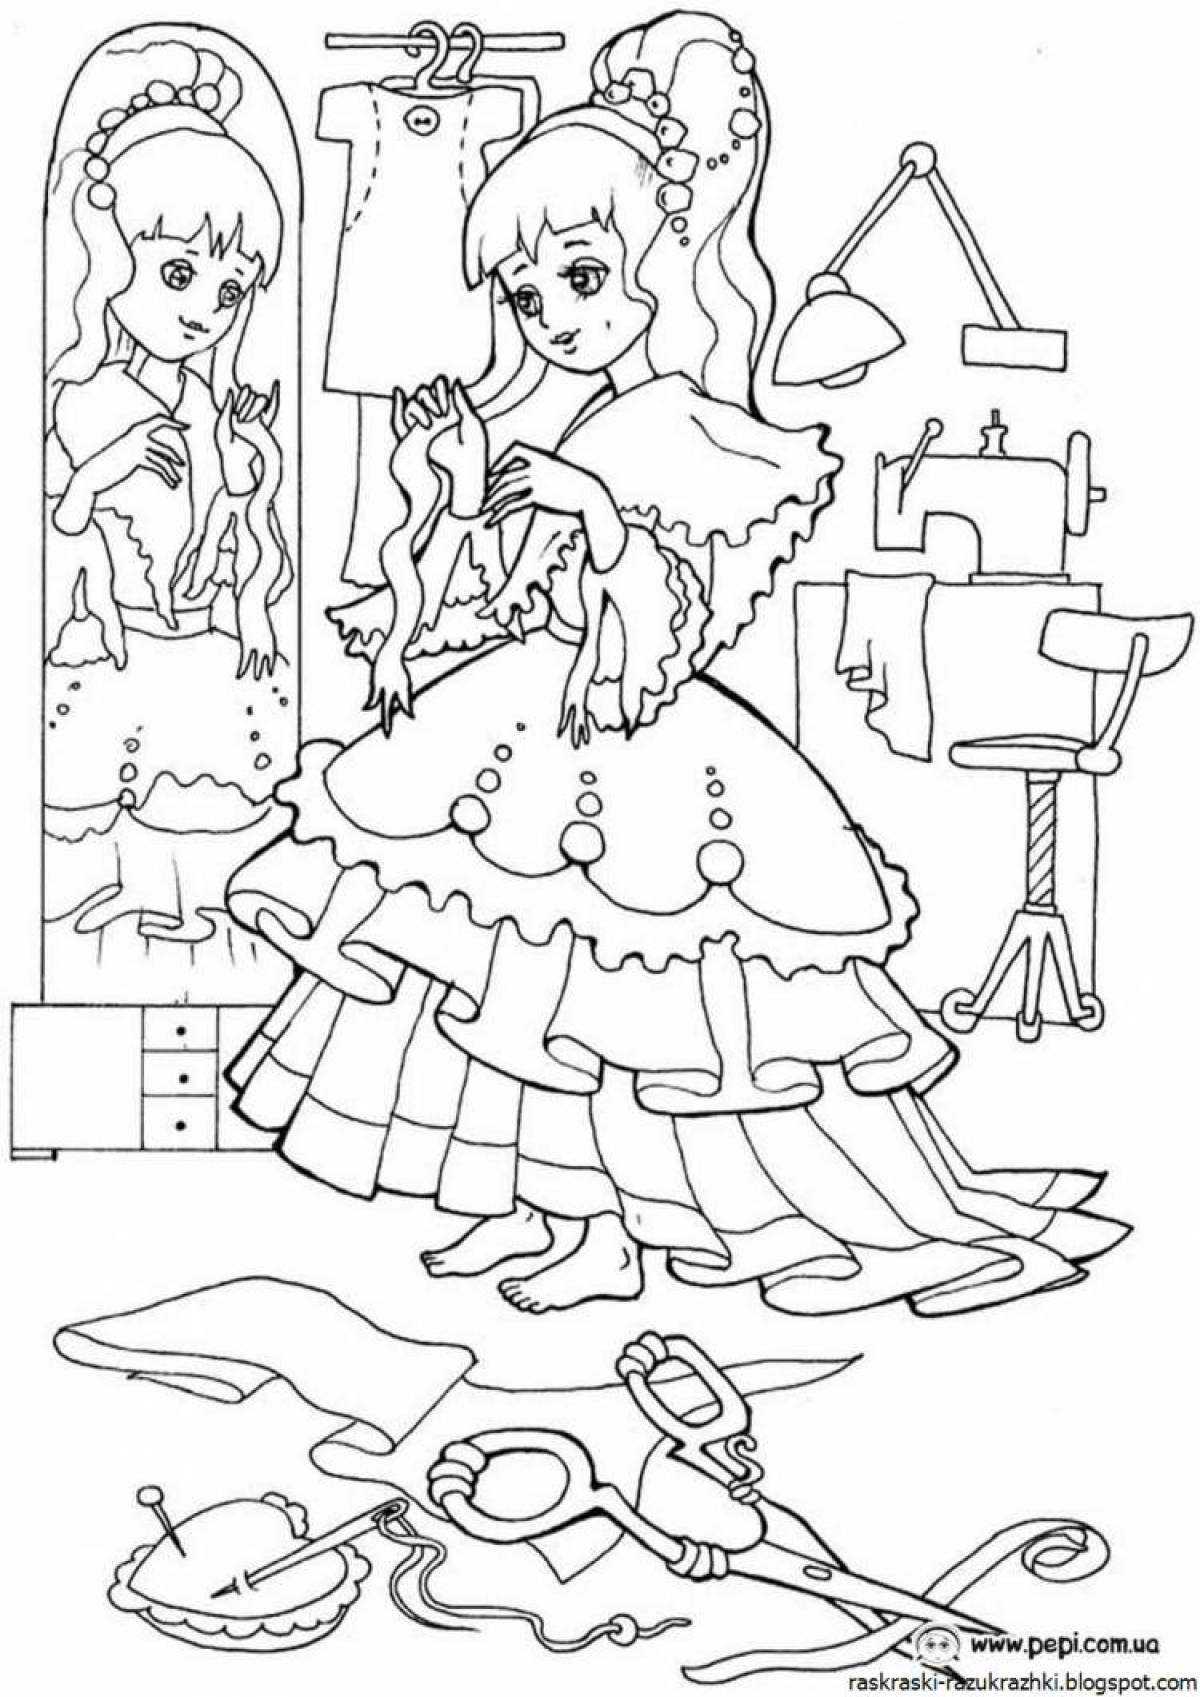 Amazing coloring book for girls 7 years old